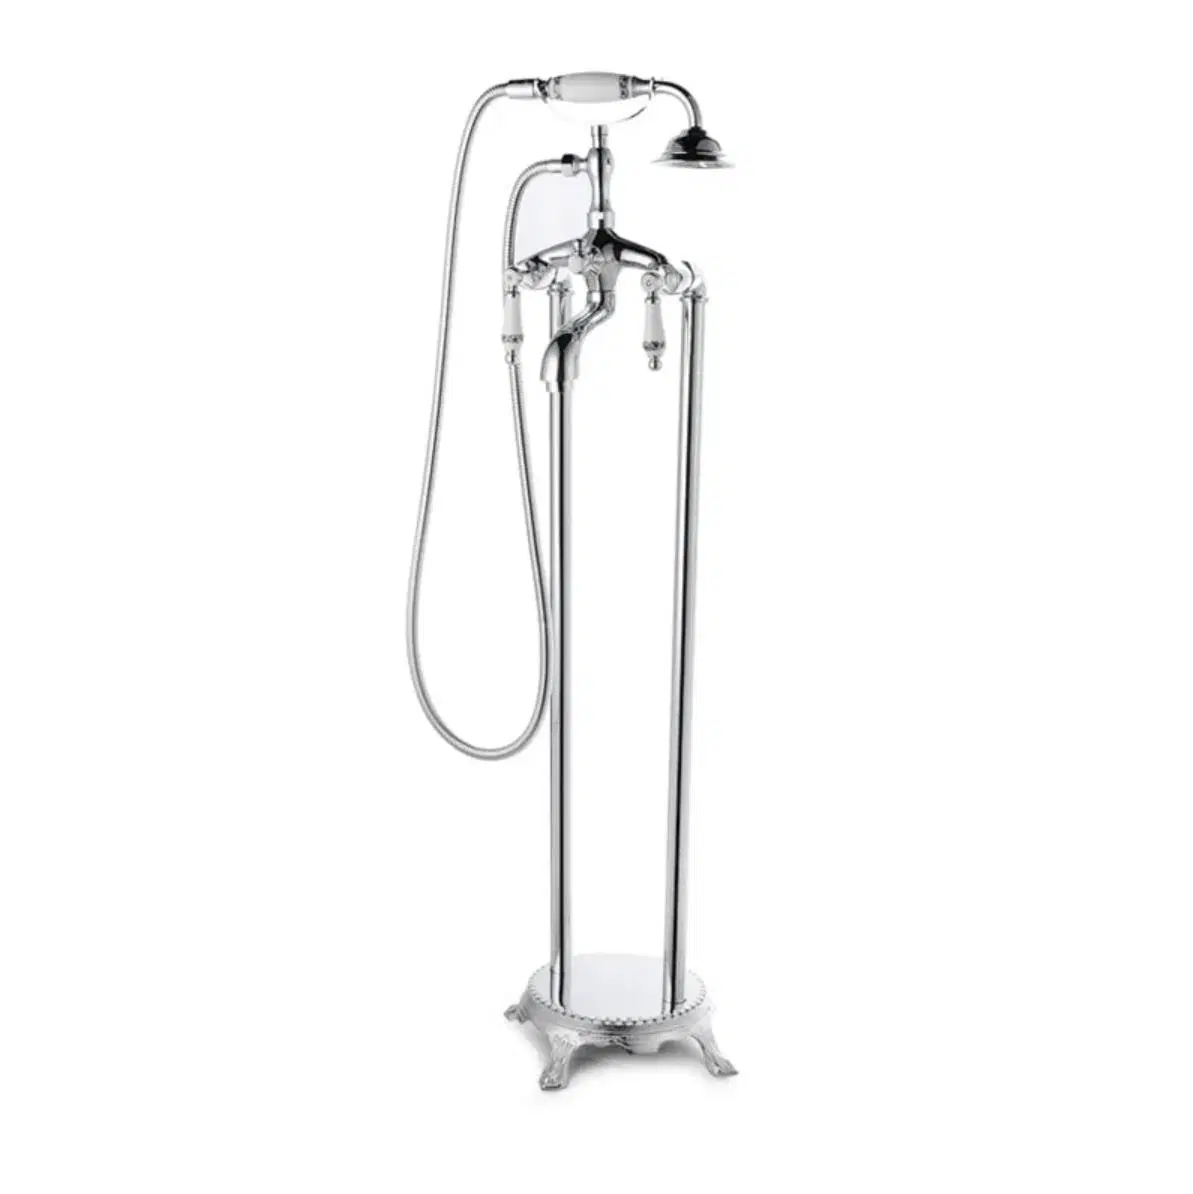 Floor Stand Bathtub Faucets with Hand Shower Floor Standing Bath Tub Faucet Hot Cold Water Mixer Tap